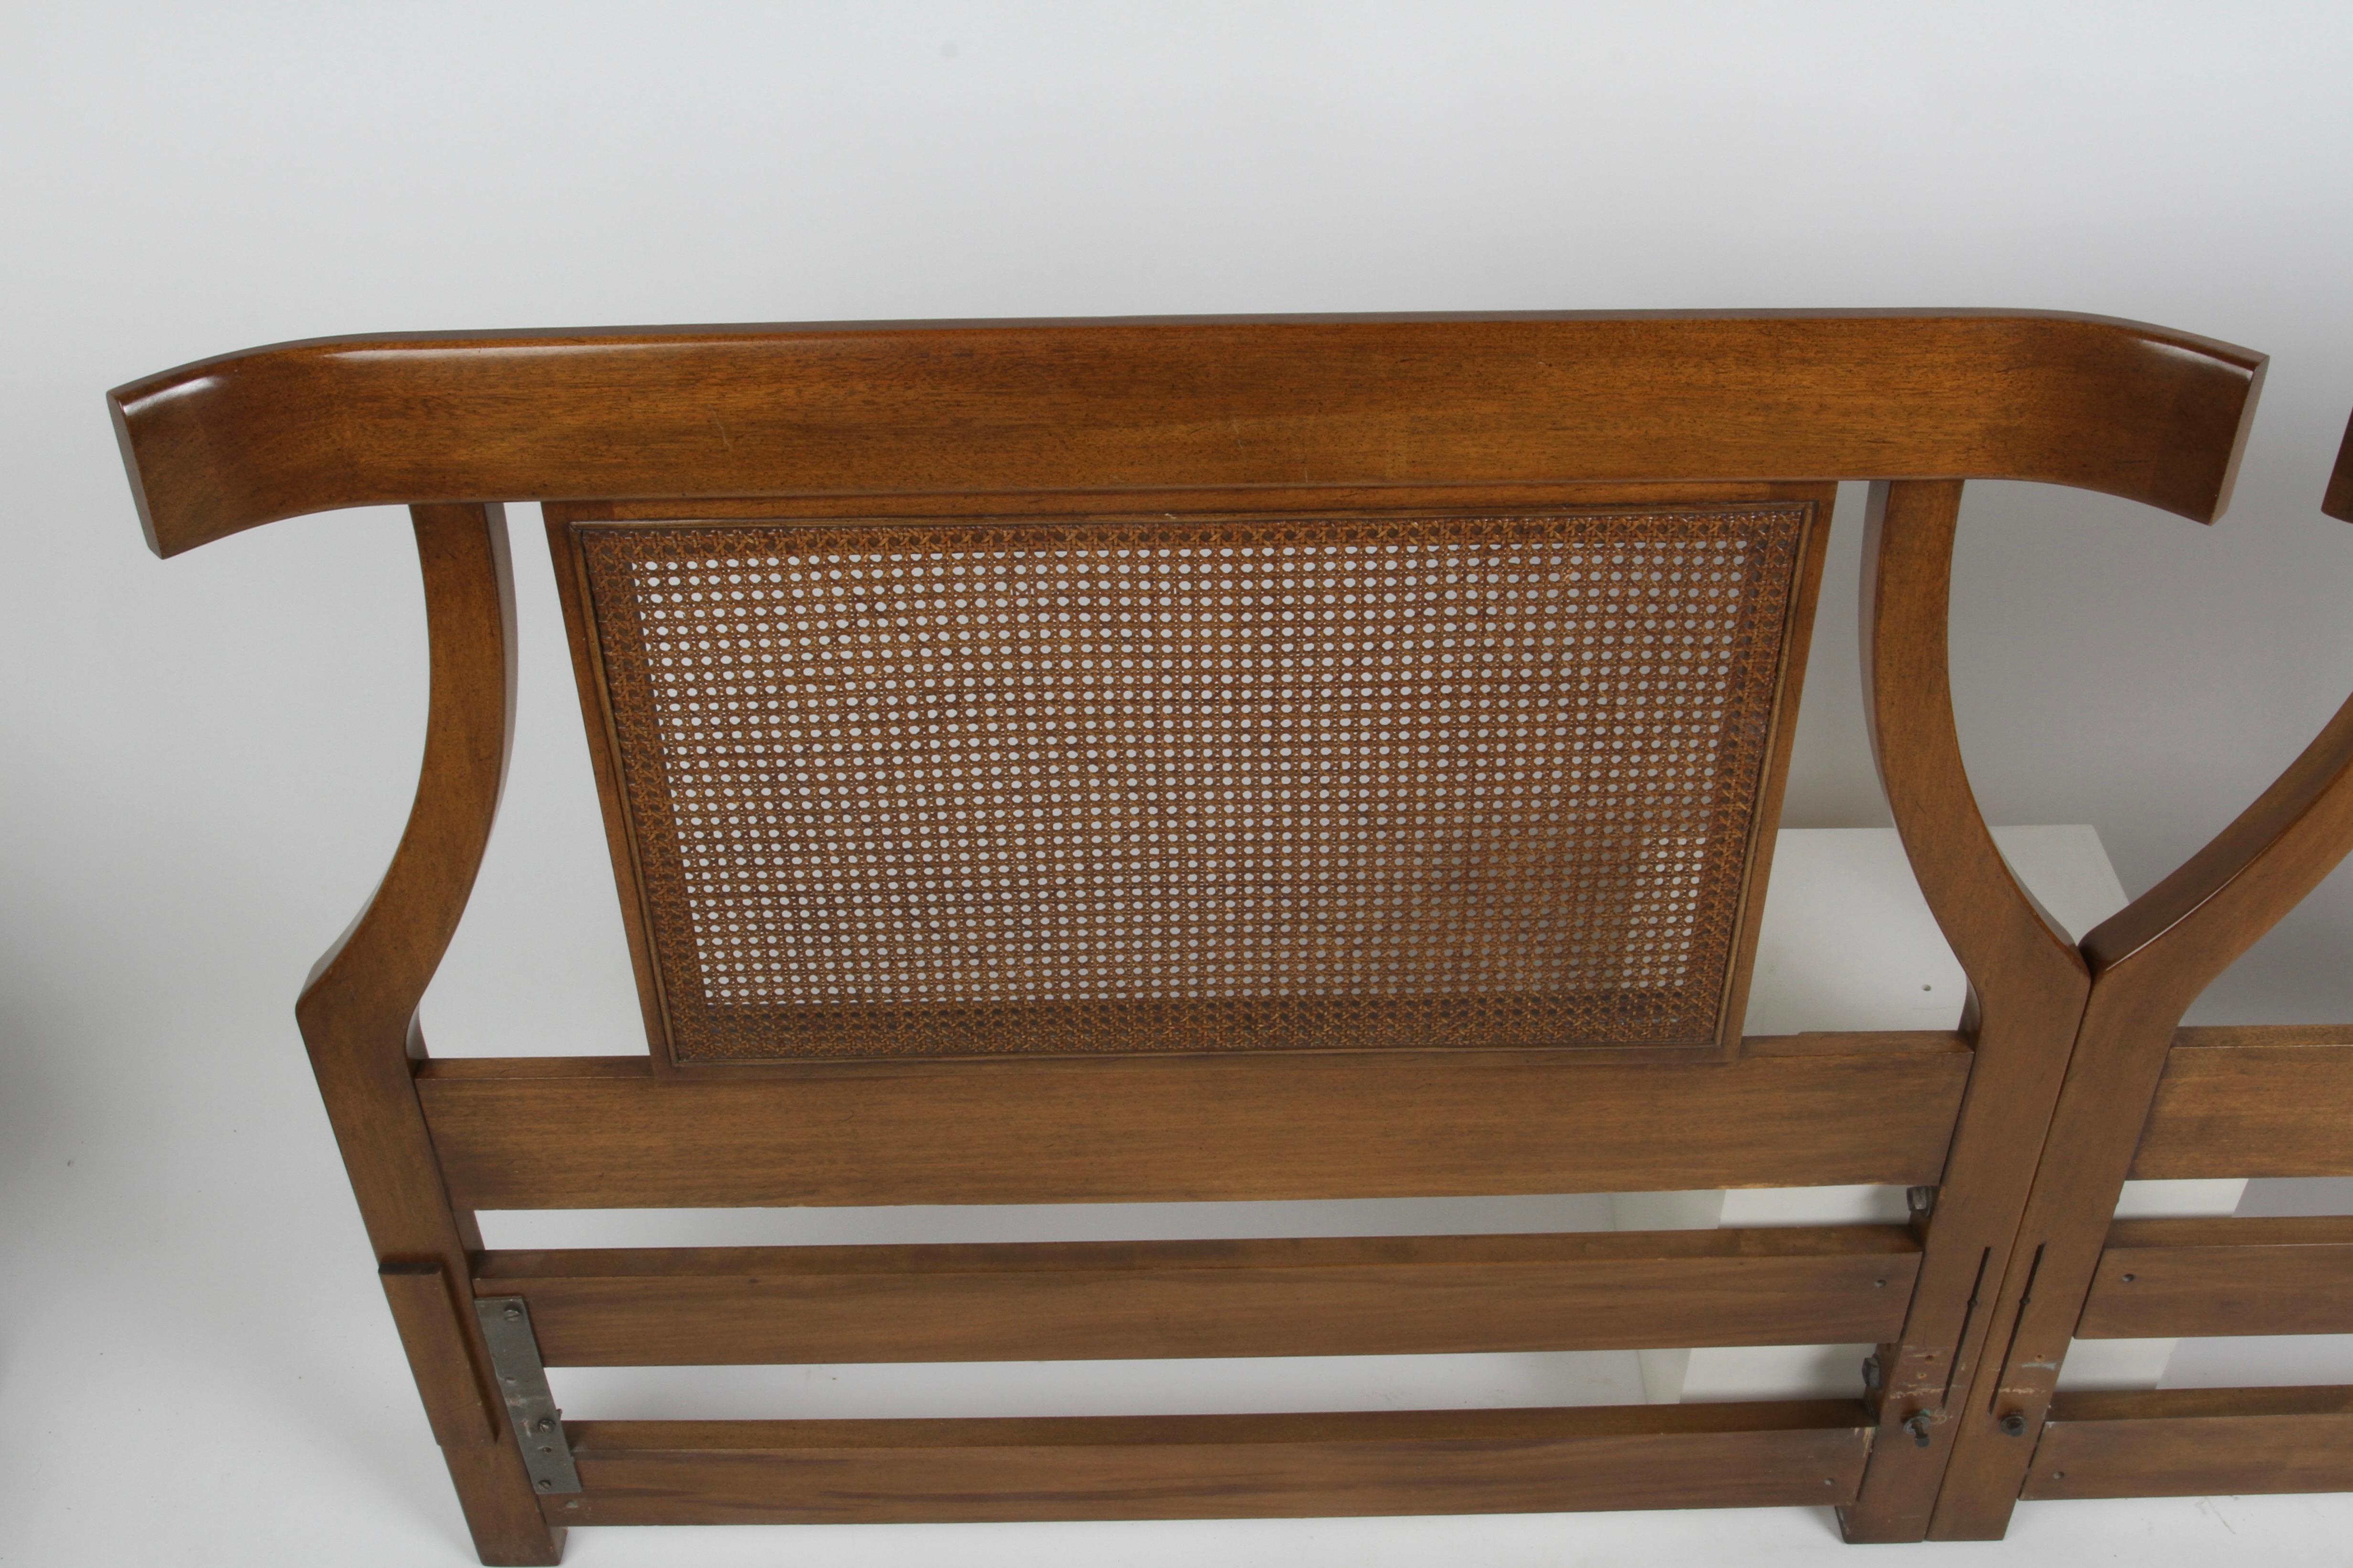 American 1960s Mid-Century Modern Curved Sculptural Mahogany & Cane King Size Headboard For Sale